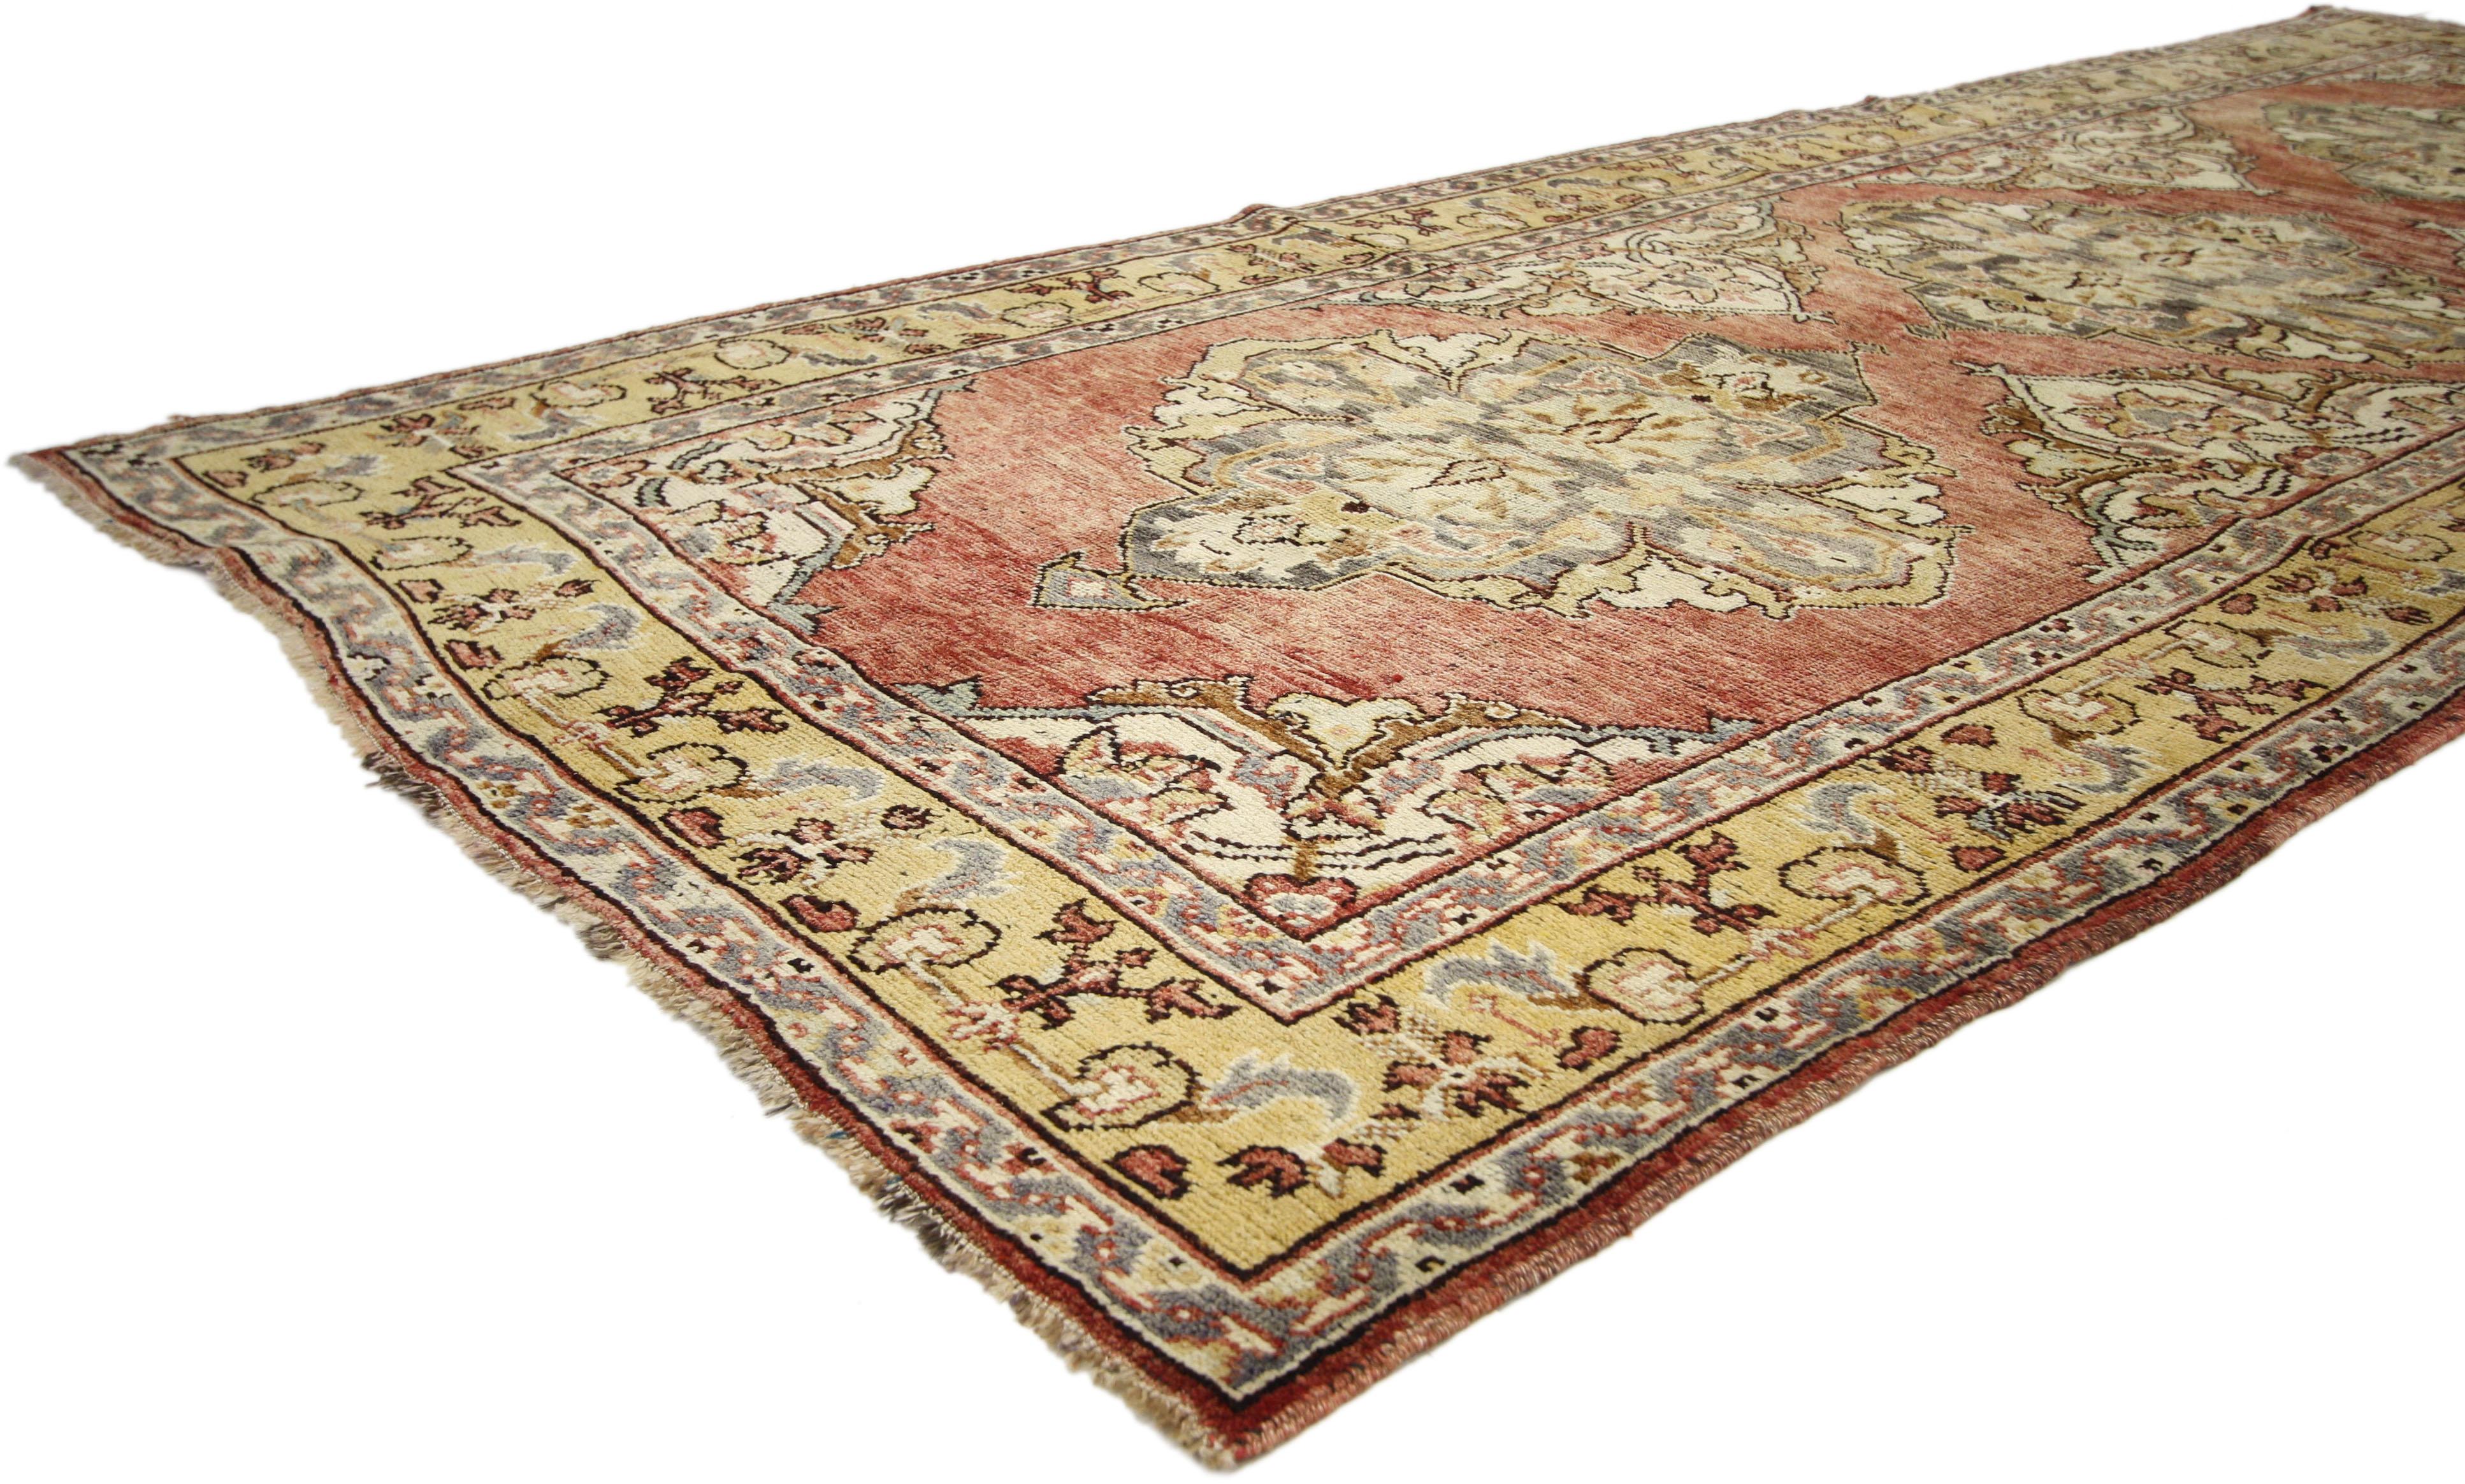 73987, vintage Turkish Oushak Gallery rug, wide hallway runner. Warm and inviting, this hand knotted wool vintage Turkish Oushak gallery rug features three ornate medallions in an abrash red field with an all-over floral pattern. Traditional